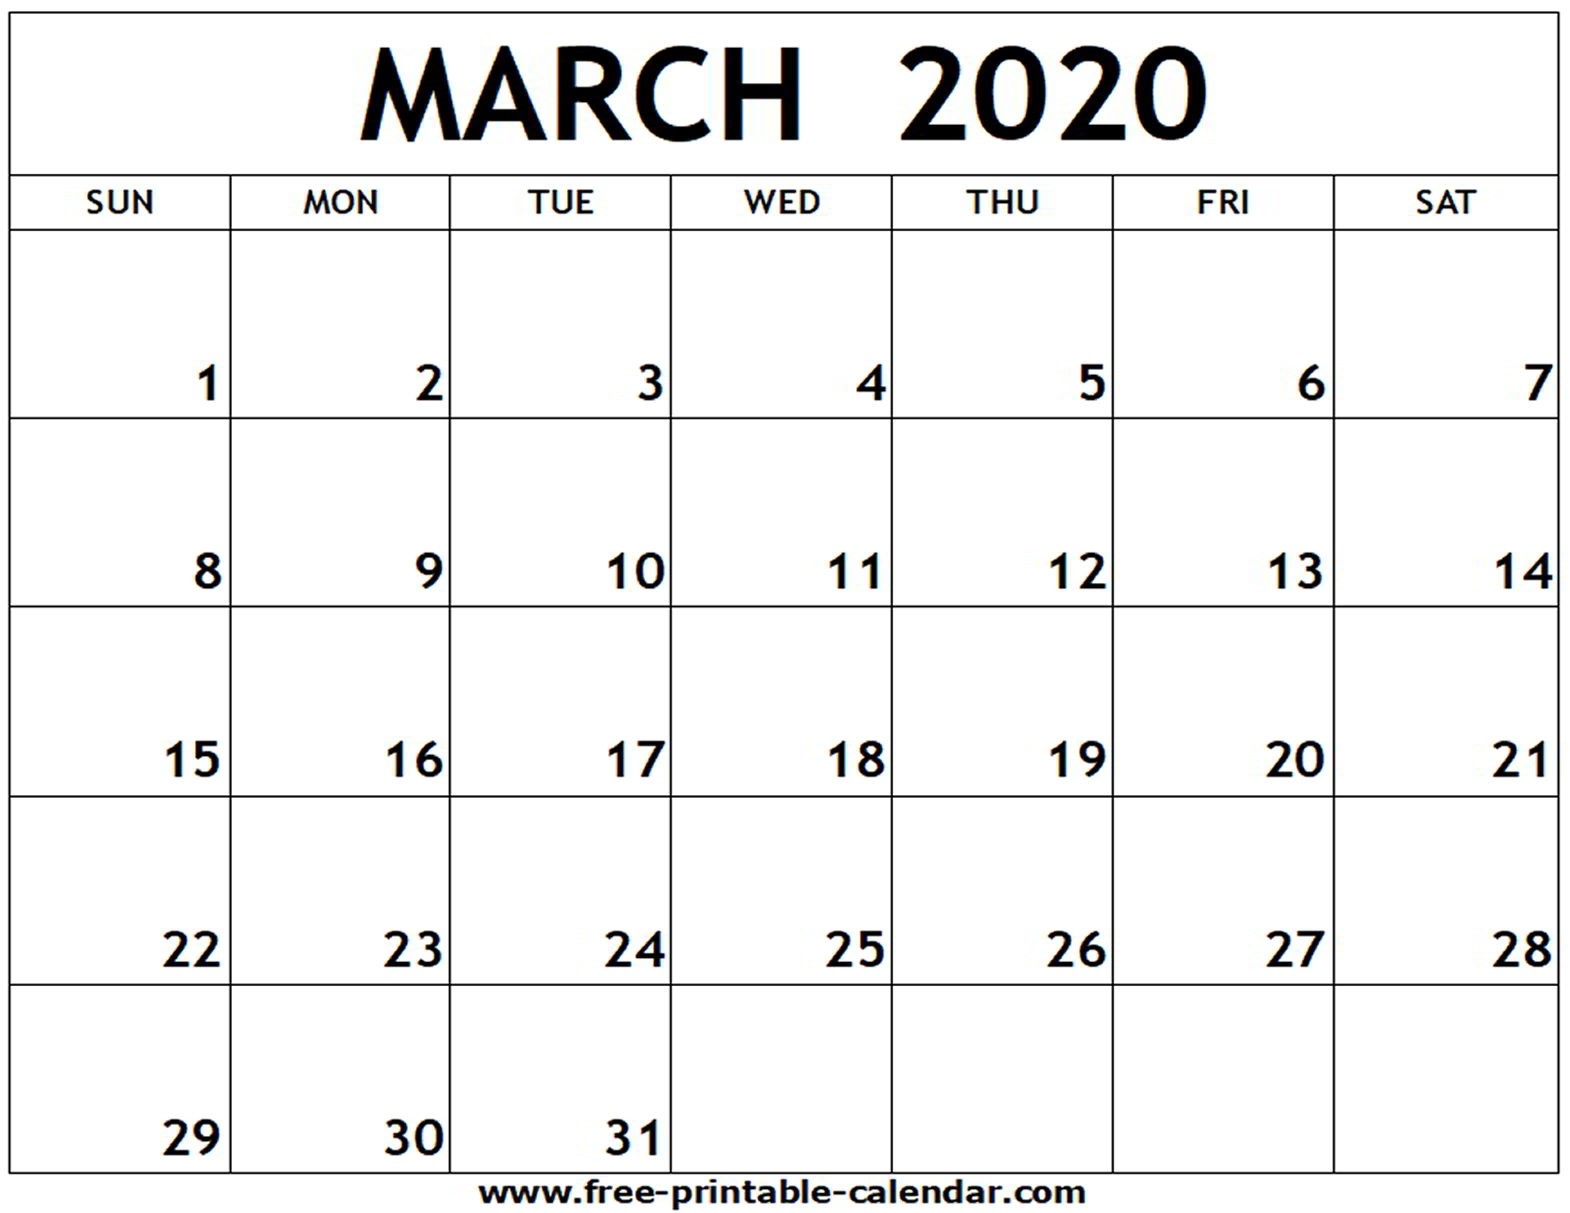 March 2020 Printable Calendar - Free-Printable-Calendar  Free Editable 2020 Monthly Calendars With Notes